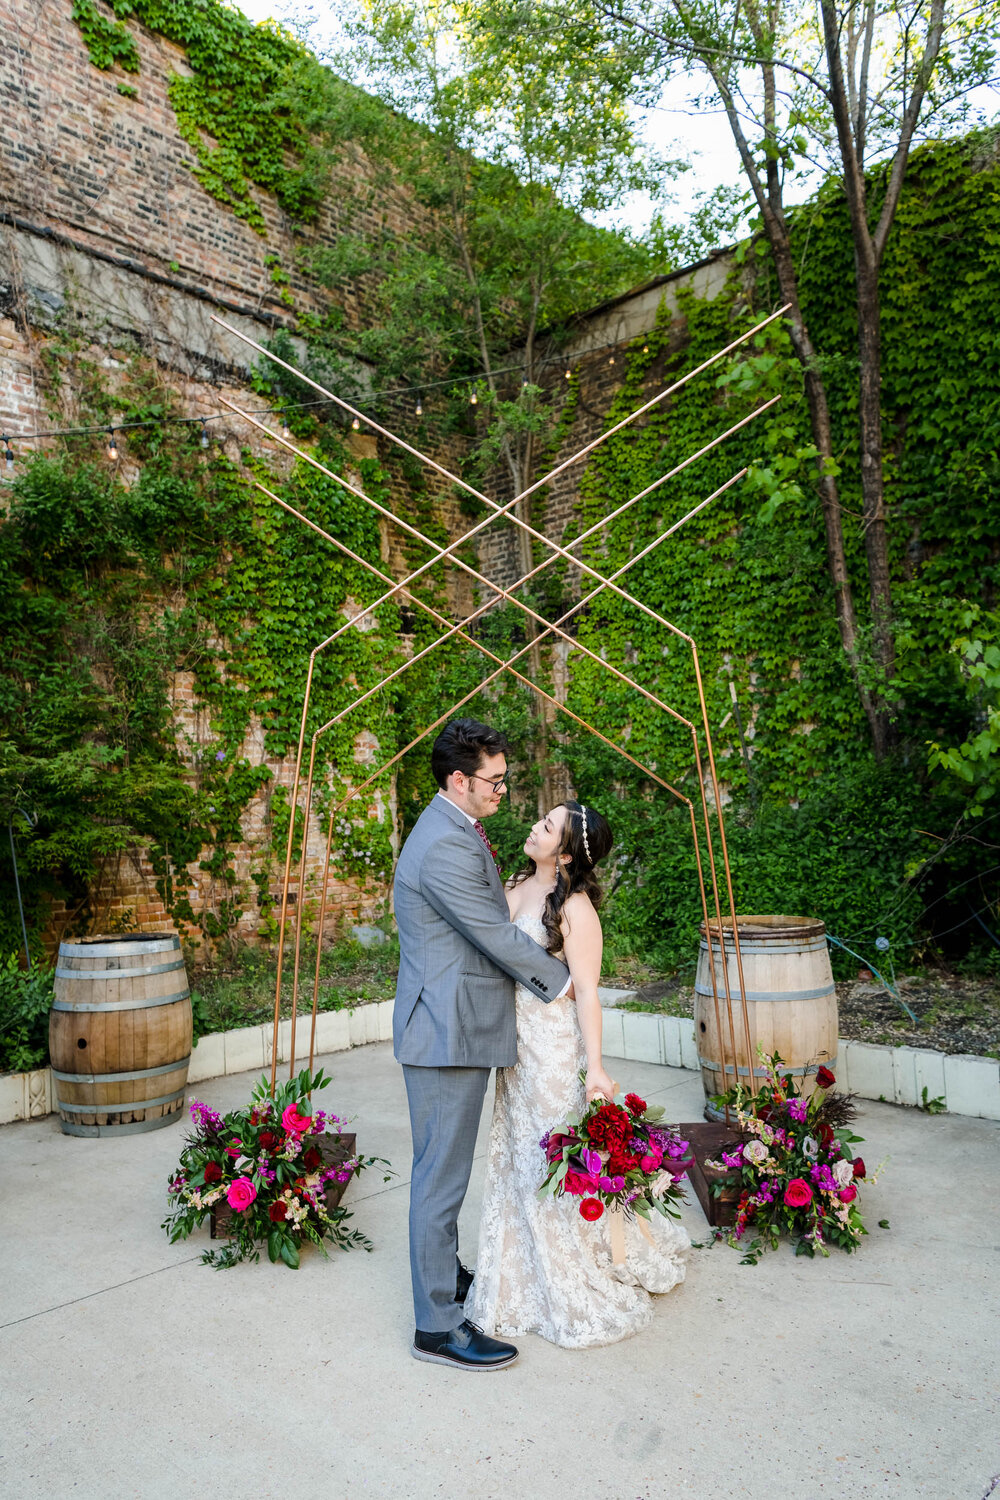 Wedding Day Photos | City Winery | J. Brown Photography | bride and groom portrait after outdoor ceremony.